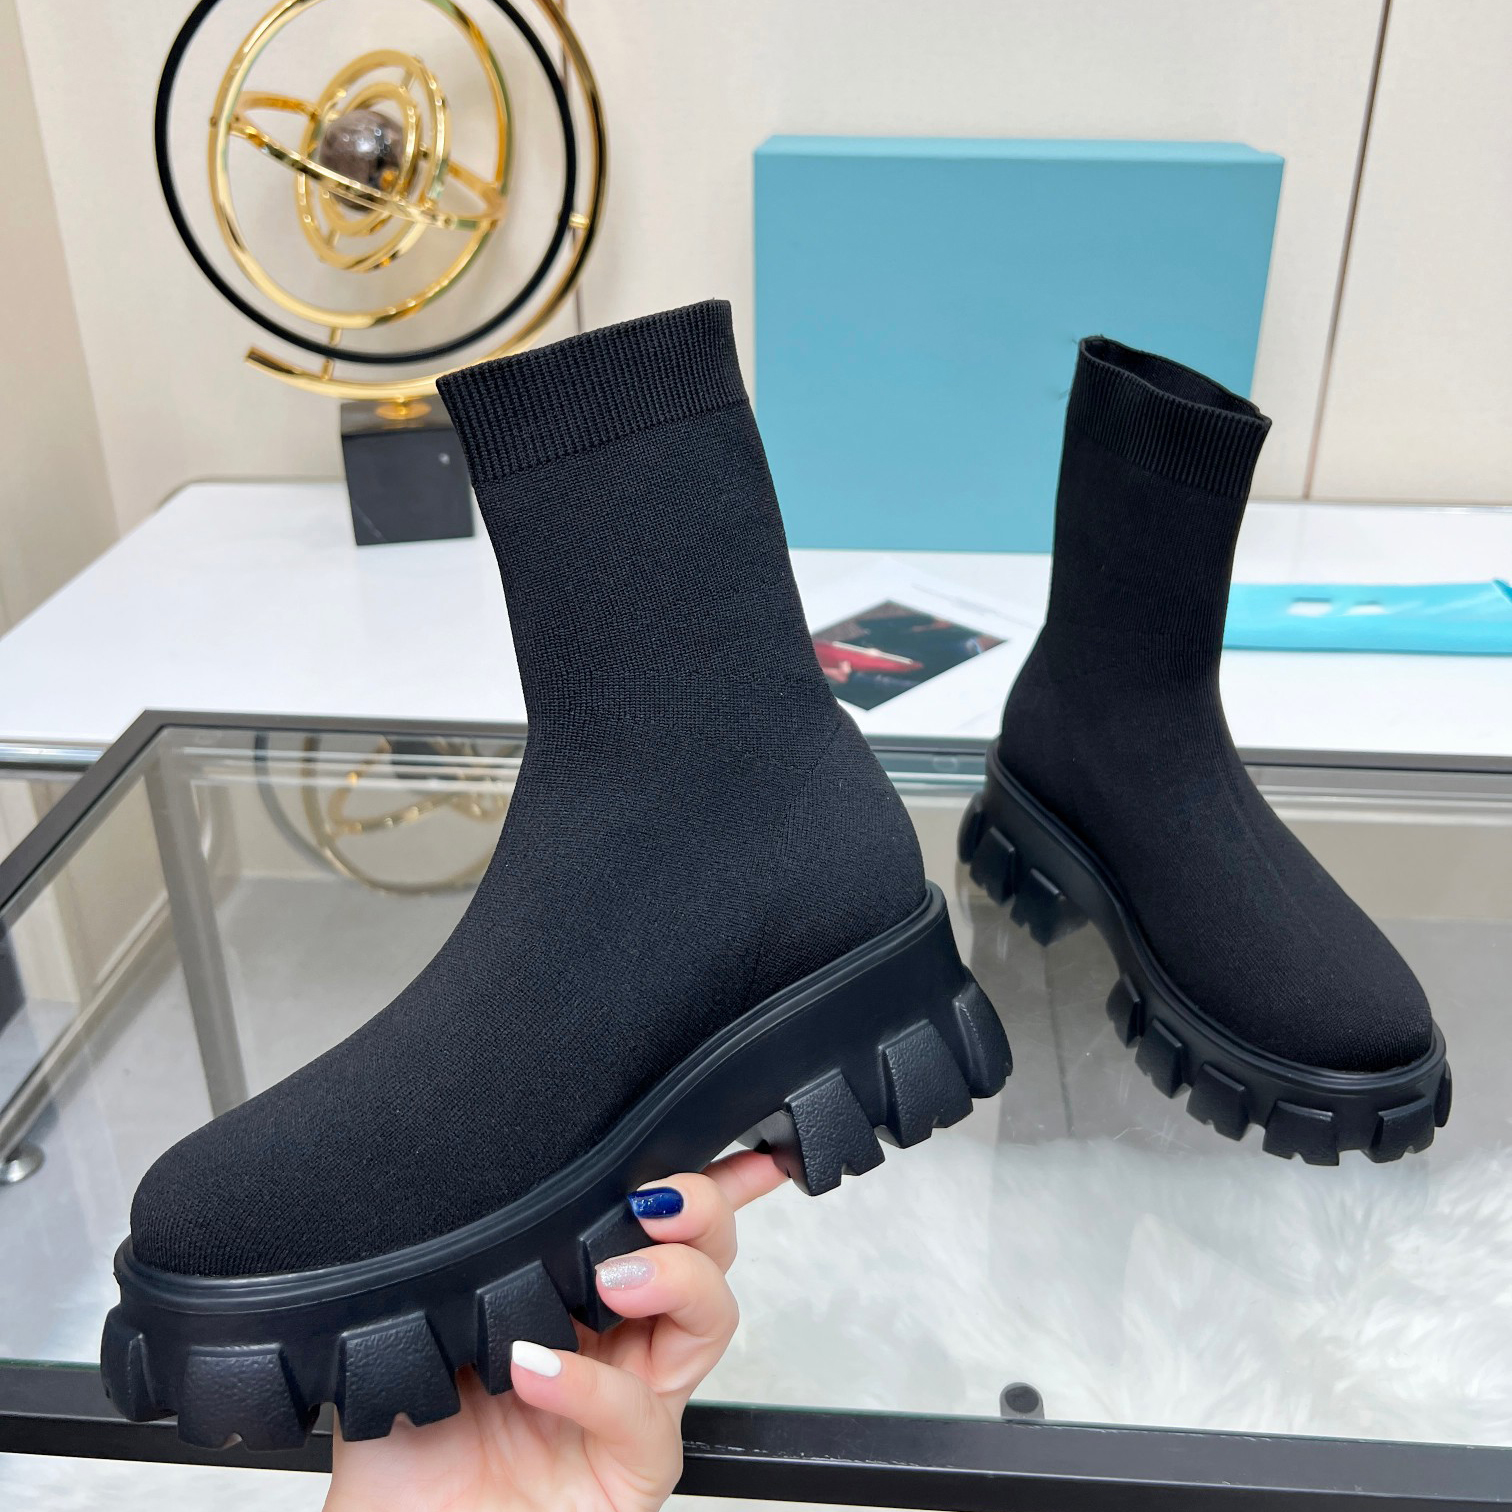 Designer Women Sock Boots Leather Chelsea Thigh Ankle Luxury Boots Full Grain Leather Stretch Platform Slip-ons Round Toe Shoes Lady Outdoor Girls Flat Booties